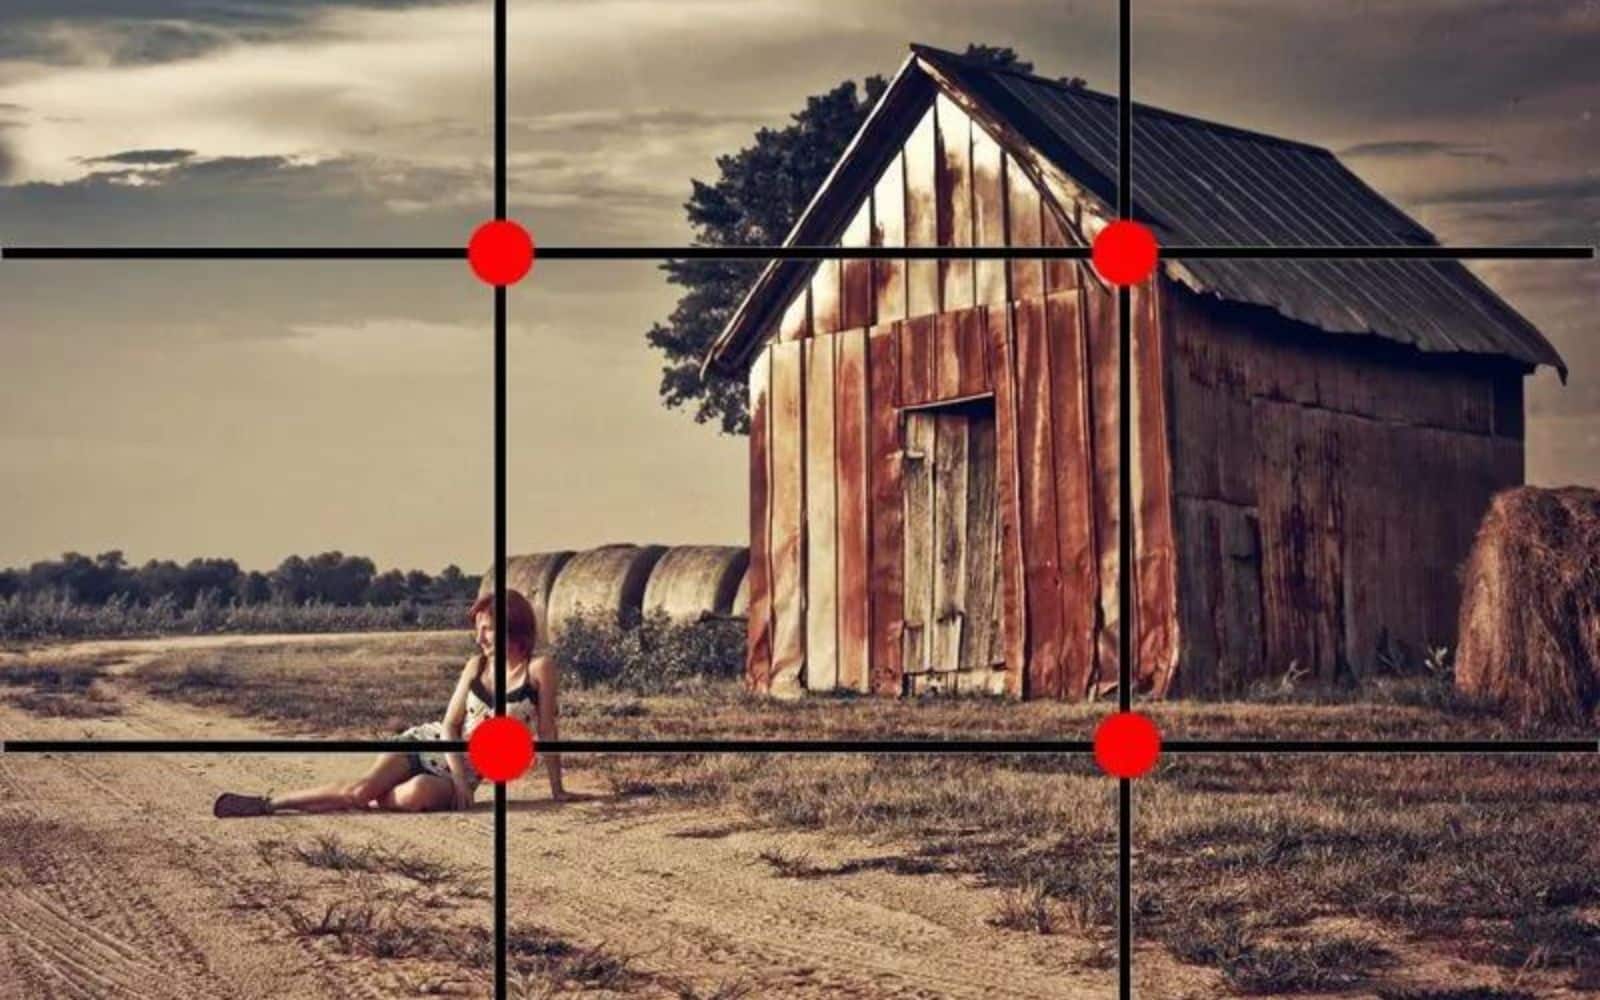 How to use, and break, the rule of thirds in photography?